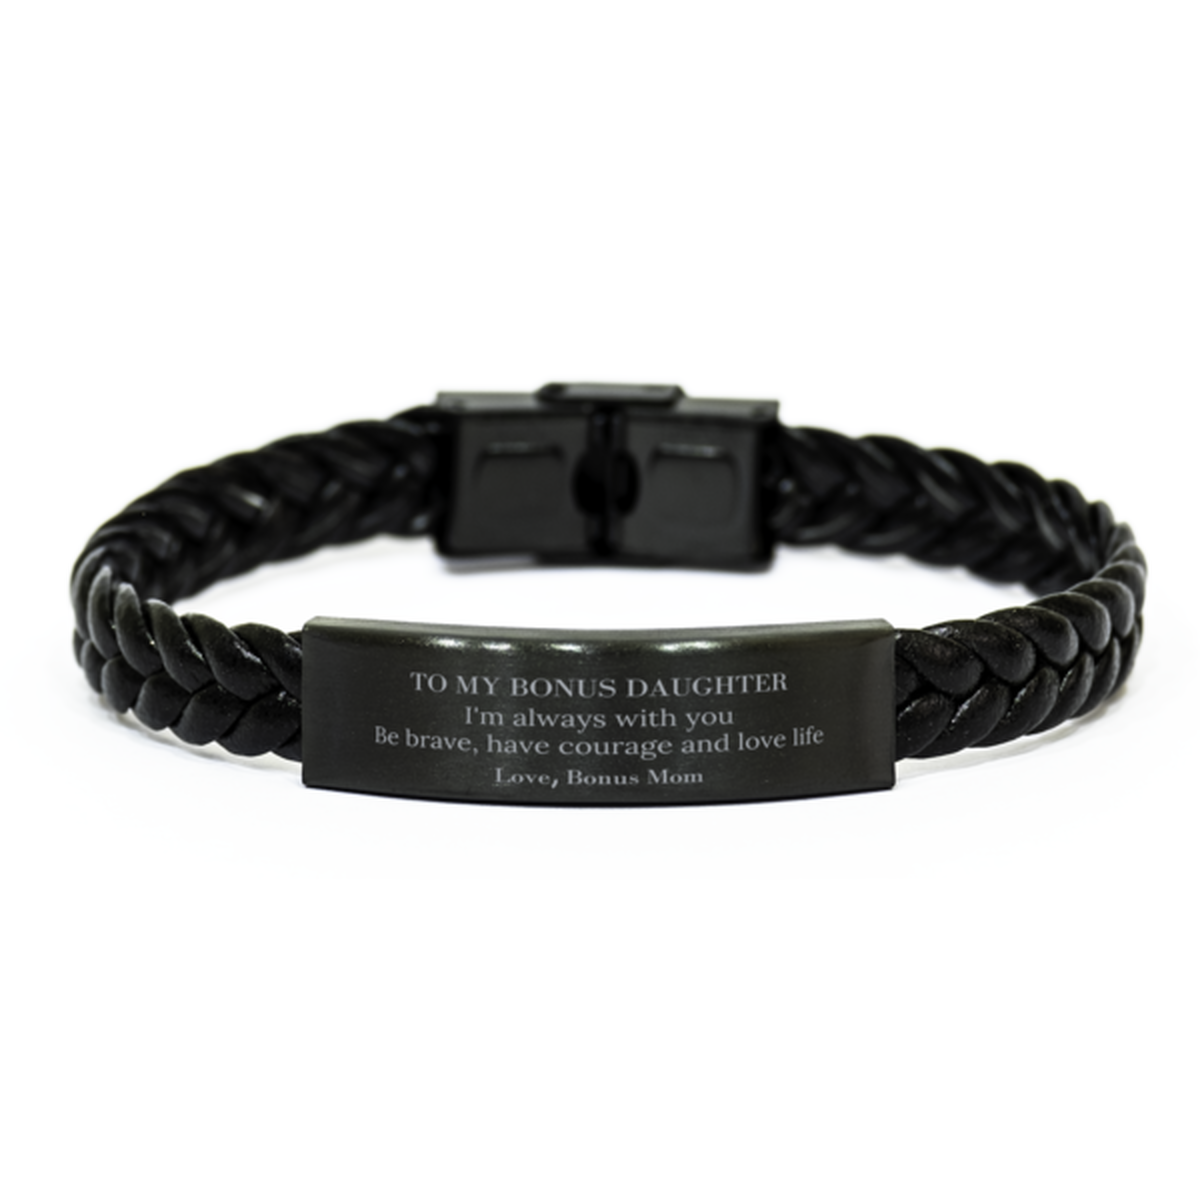 To My Bonus Daughter Gifts from Bonus Mom, Unique Braided Leather Bracelet Inspirational Christmas Birthday Graduation Gifts for Bonus Daughter I'm always with you. Be brave, have courage and love life. Love, Bonus Mom